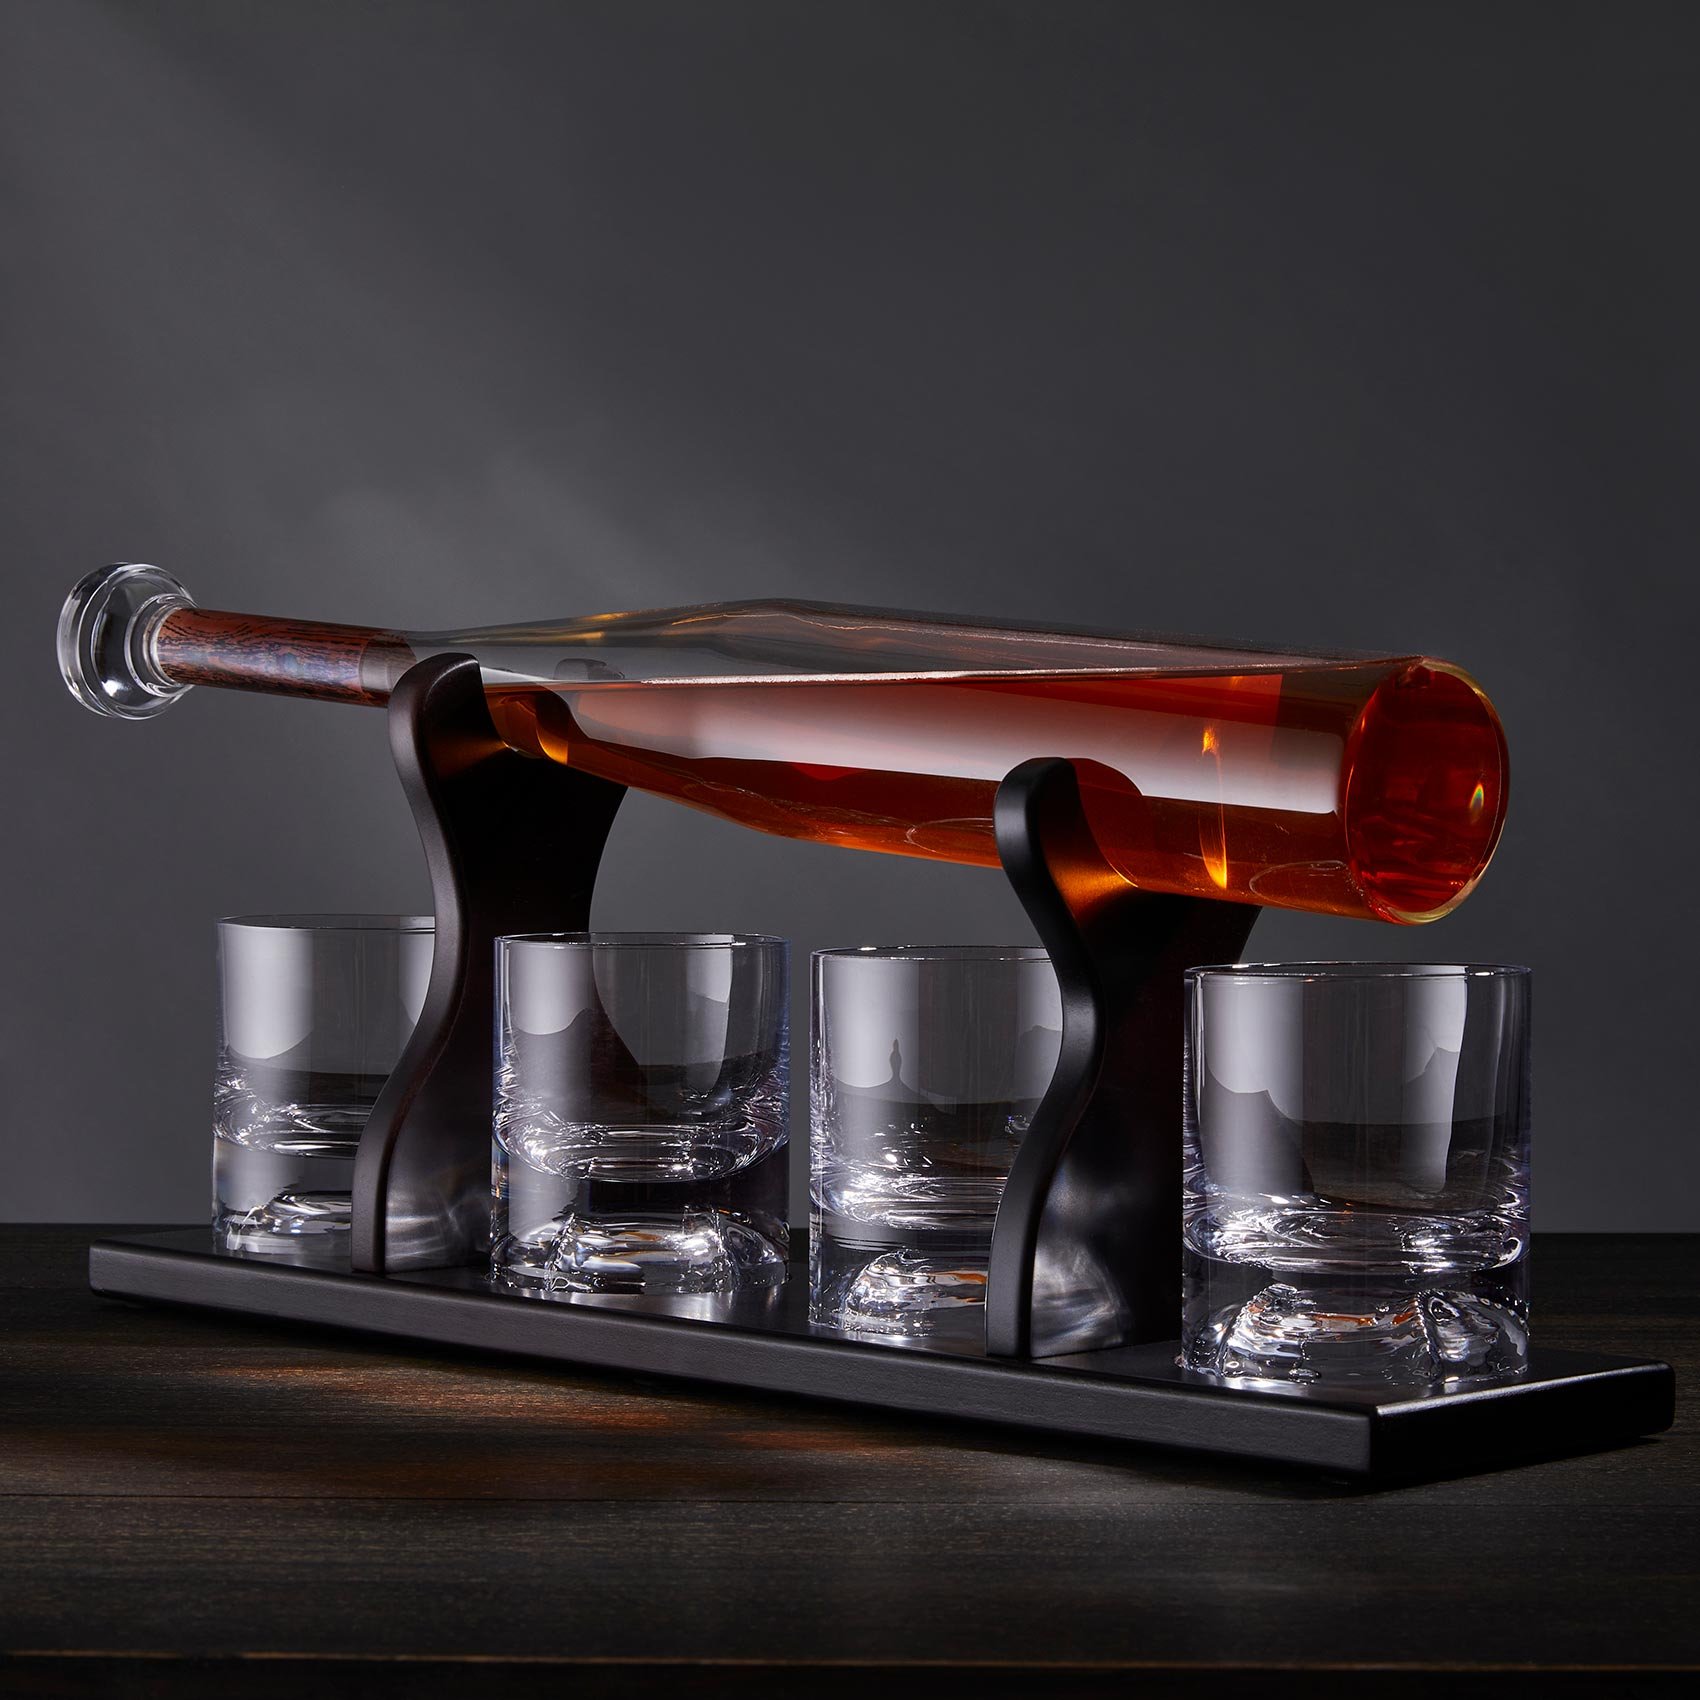 Whiskey-decanter-creative-product-photography-1.jpg